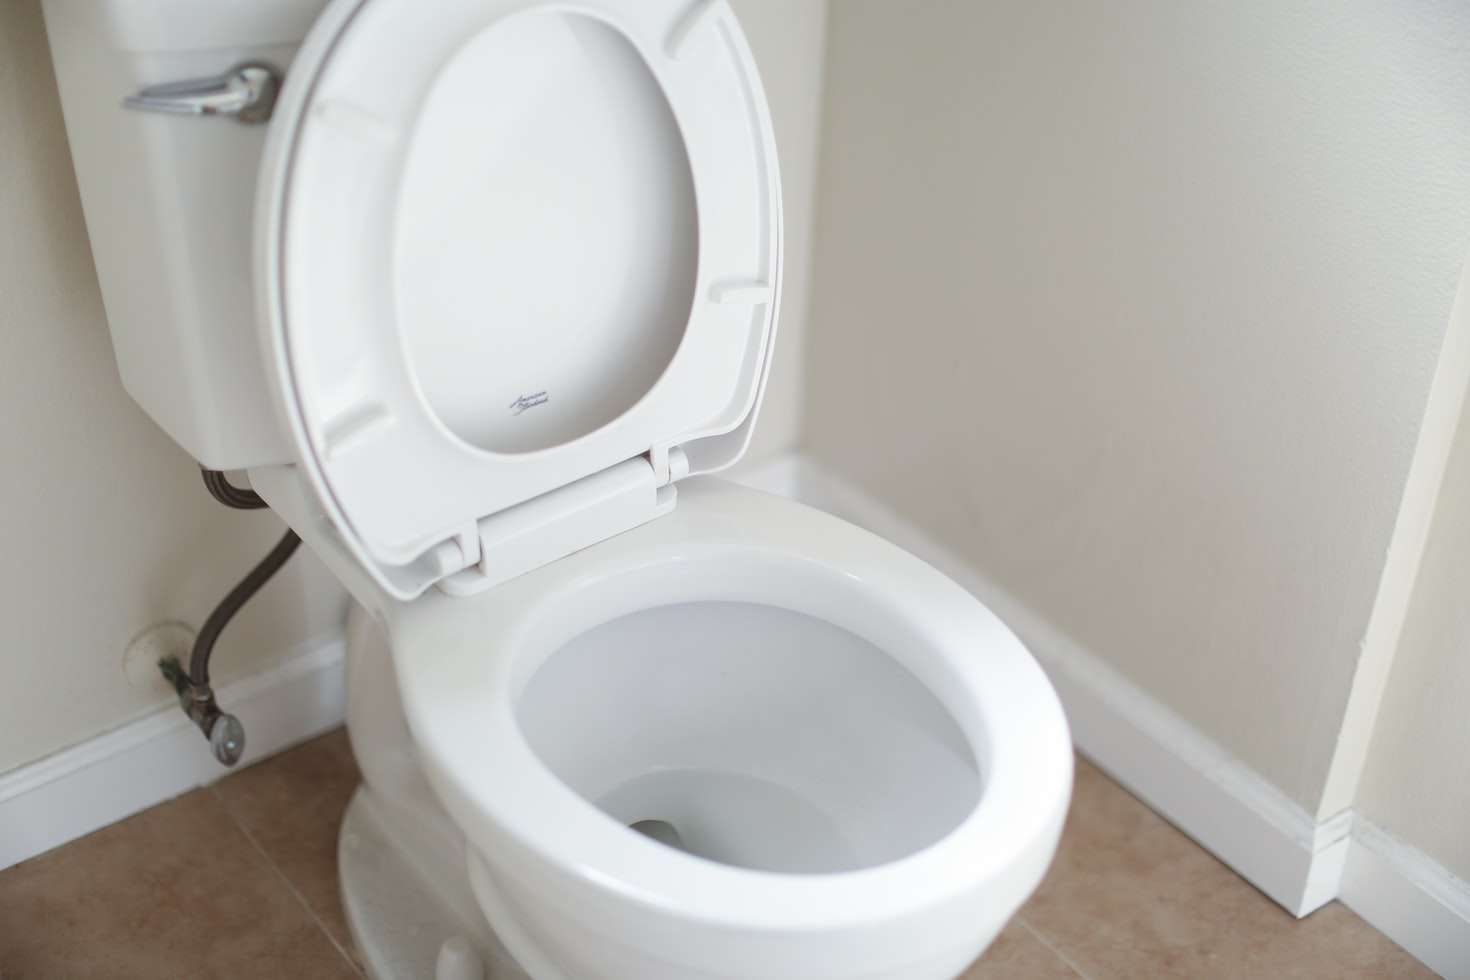 Will There Be Considerable Damage from a Running Toilet?